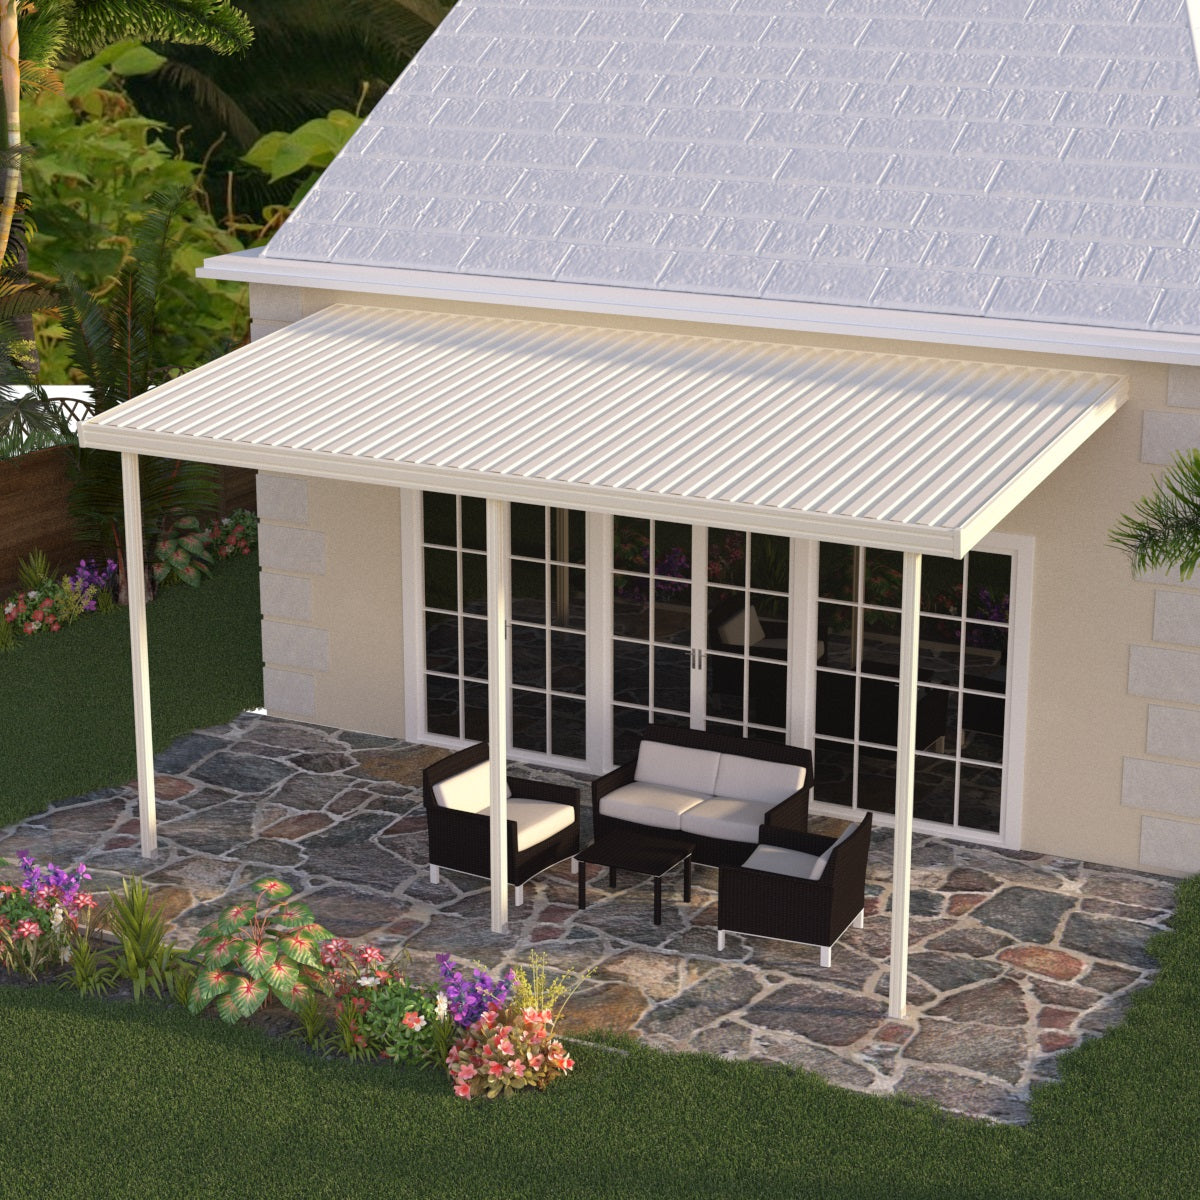 12 ft. Deep x 22 ft. Wide Ivory Attached Aluminum Patio Cover - 3 Posts - (10lb Low Snow Area)